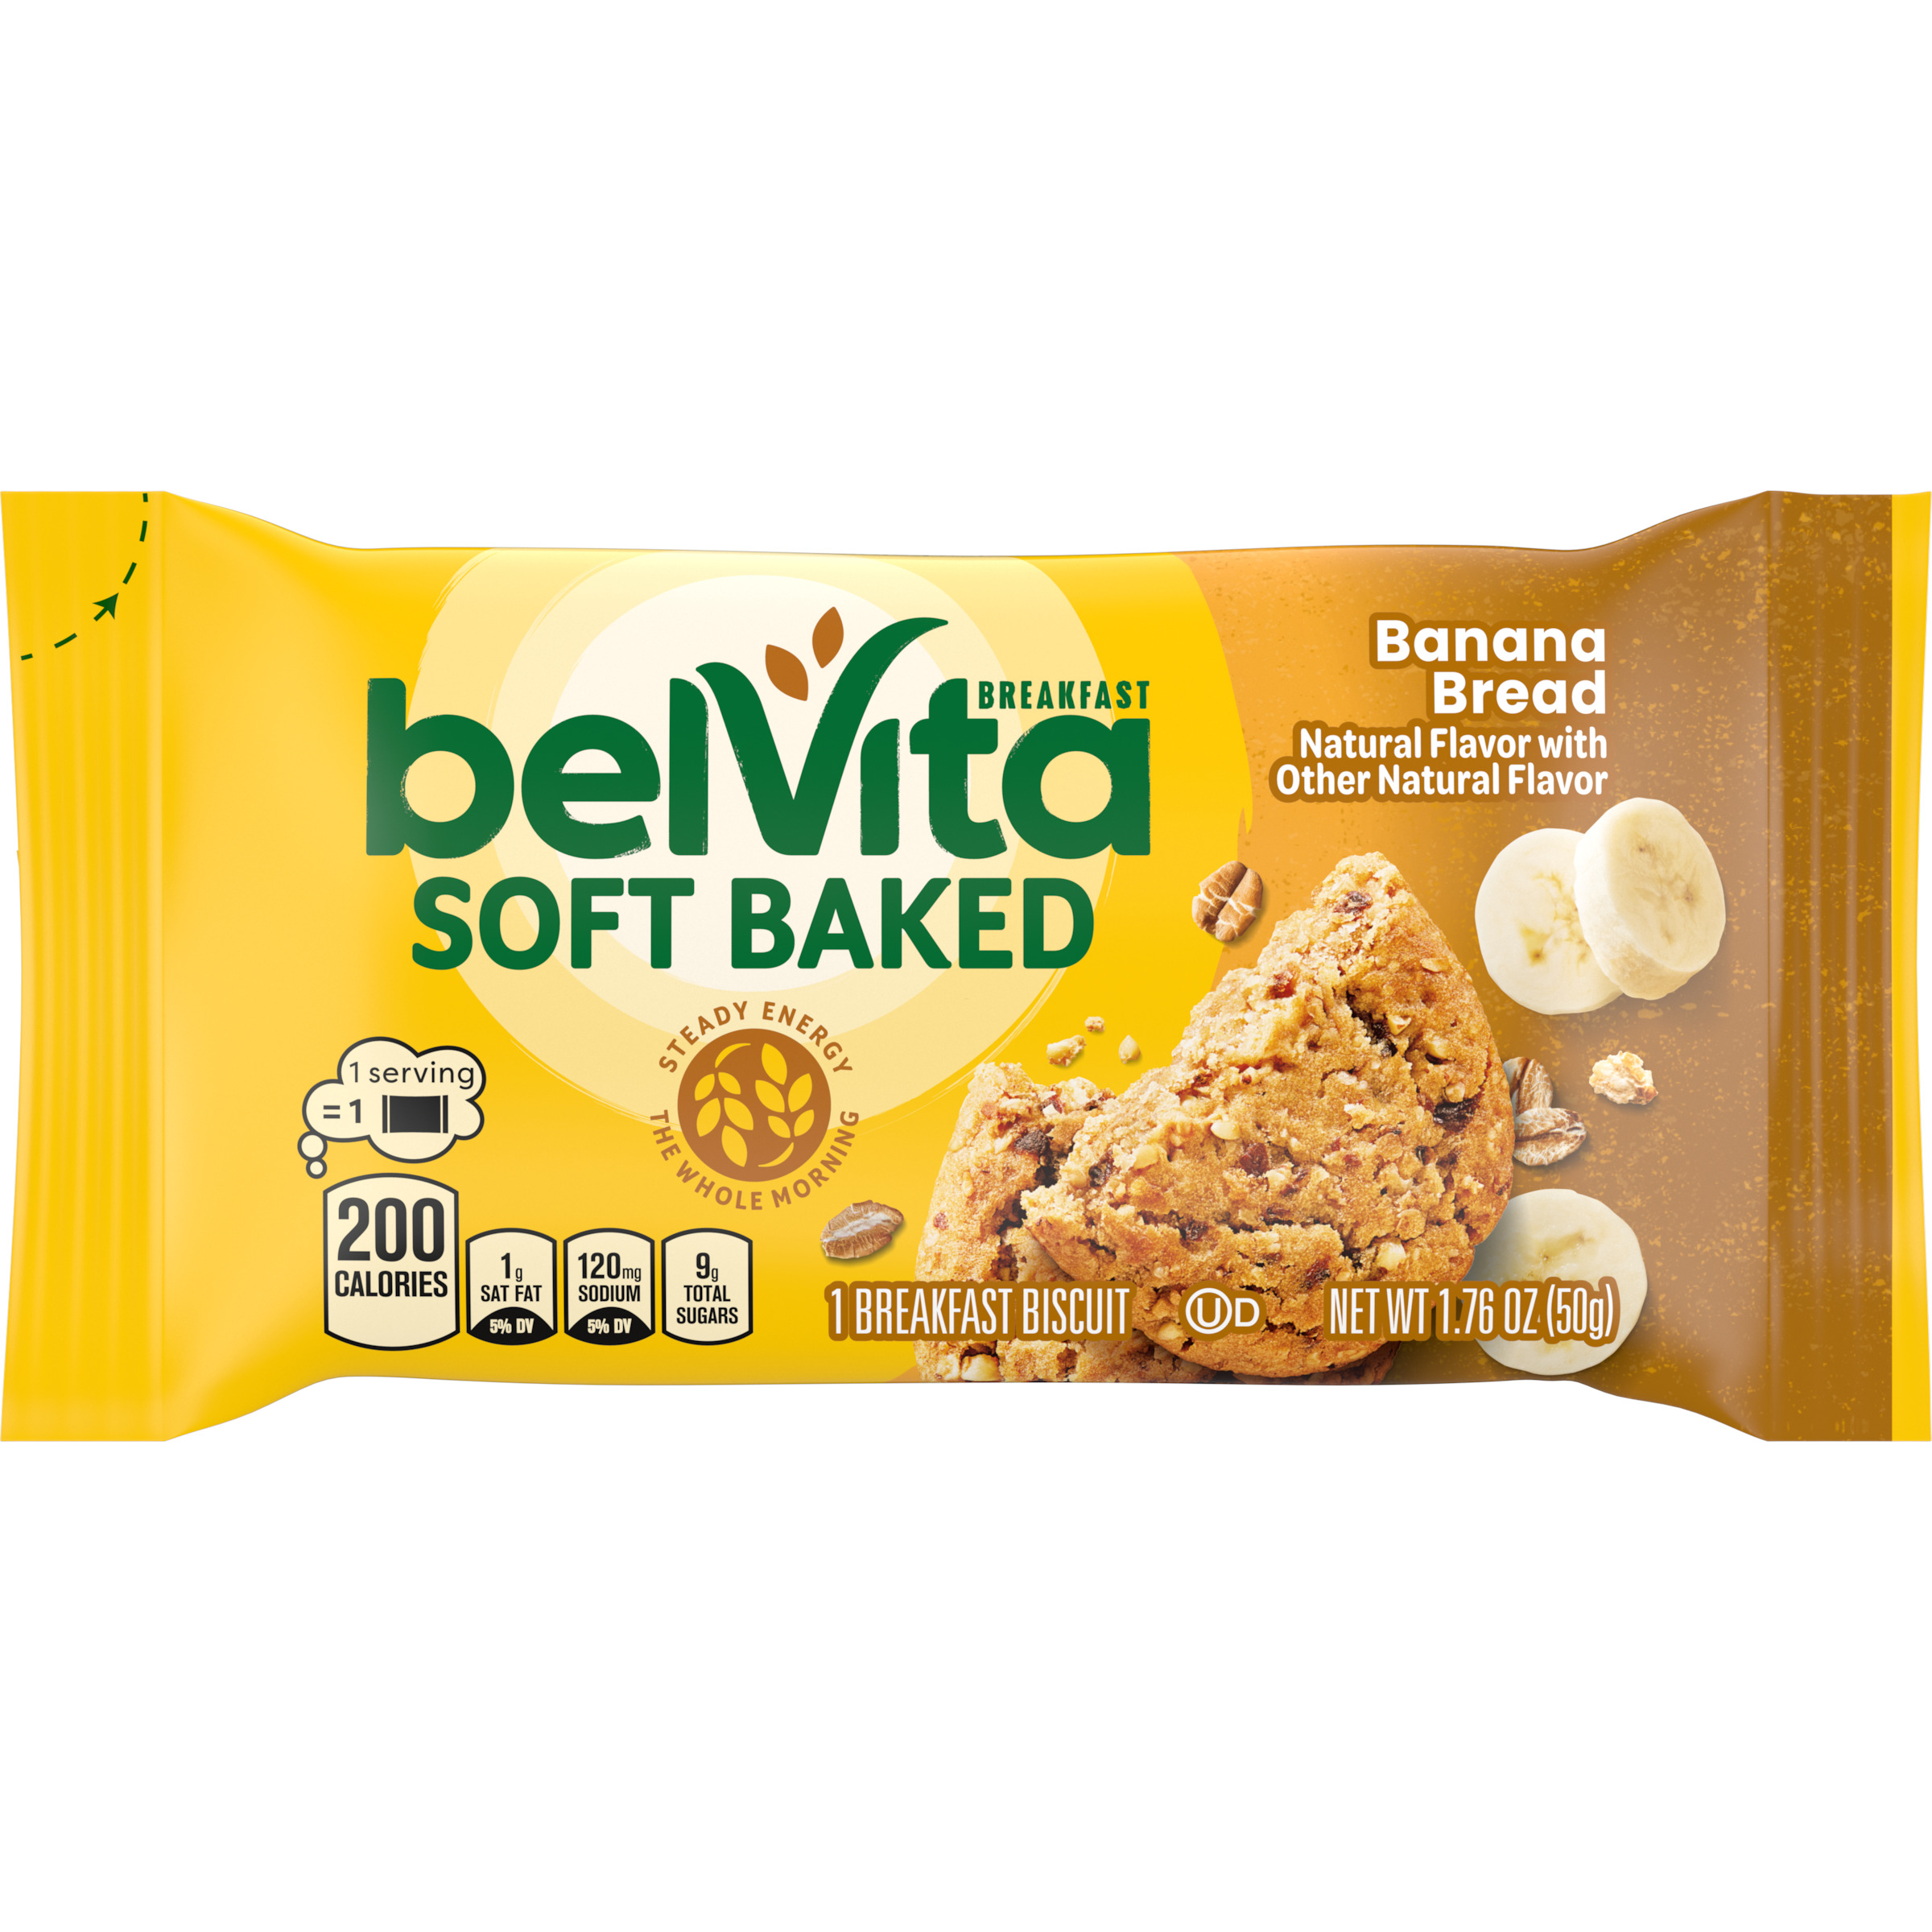 belVita Soft Baked Banana Bread Breakfast Biscuits, 1 Pack (1 Biscuit Per Pack)-thumbnail-1